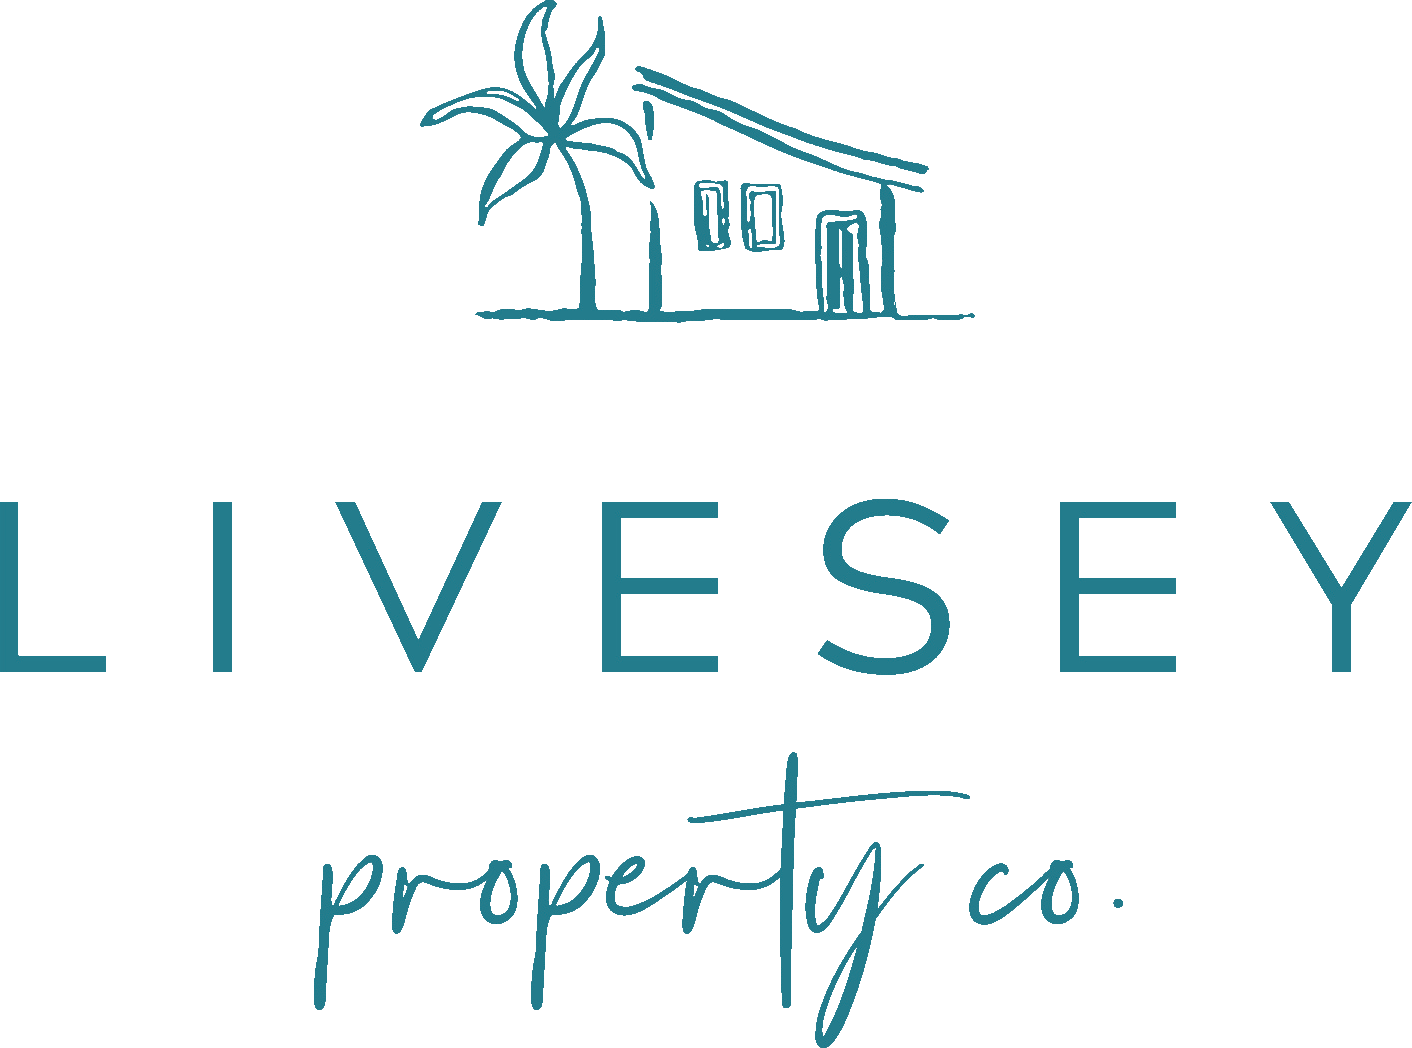 Livesey Property Co. - TEWANTIN